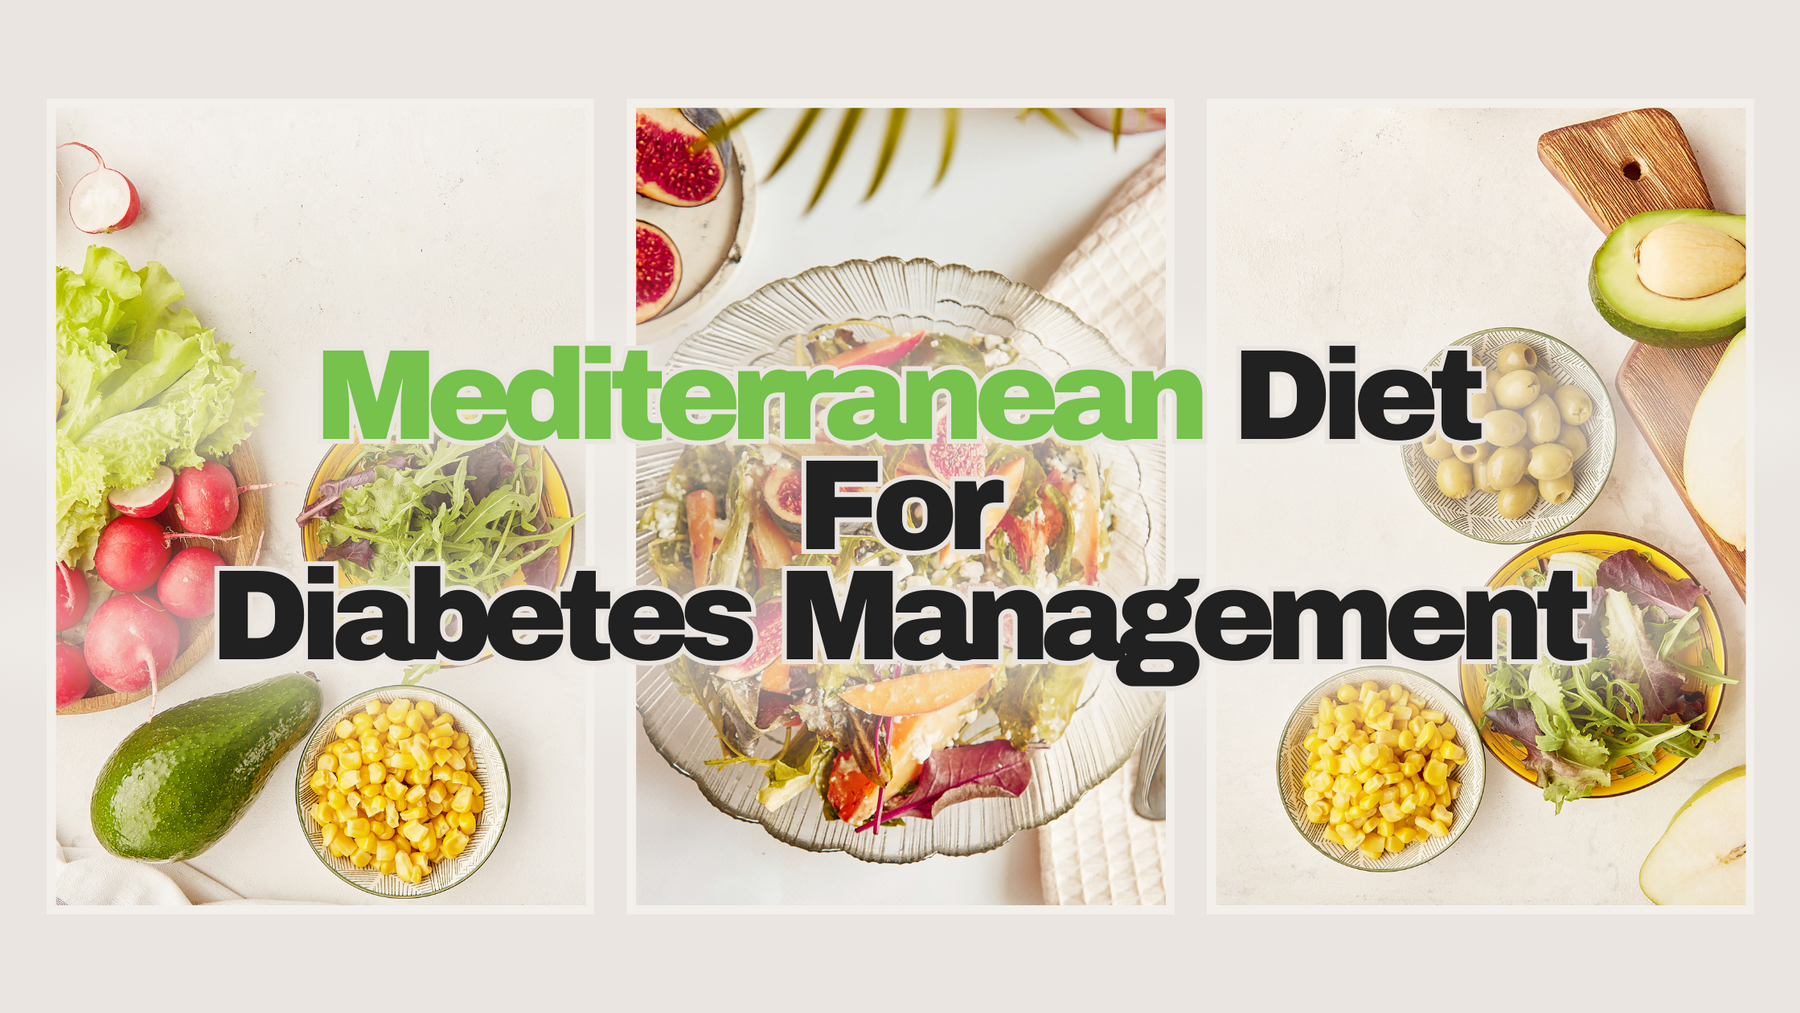 Diabetes Reversal with a Mediterranean Diet- Do's and Don'ts